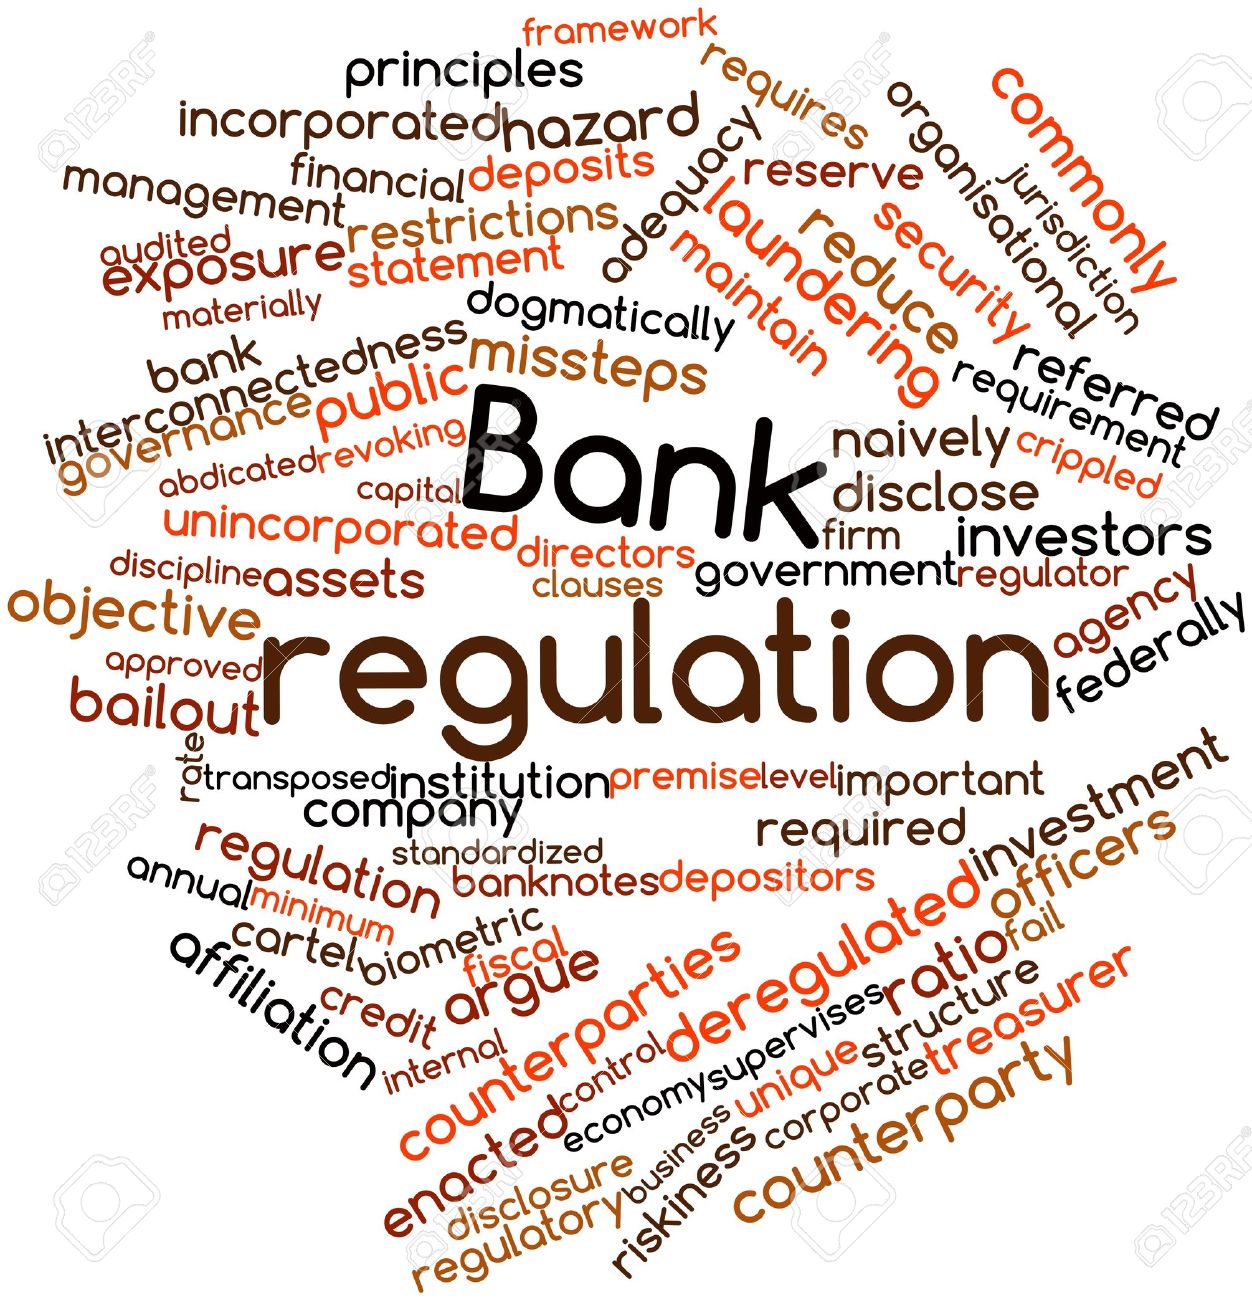 Brief History Of Bank Regulations And Overview Of FDICIA And SOX, New York, United States